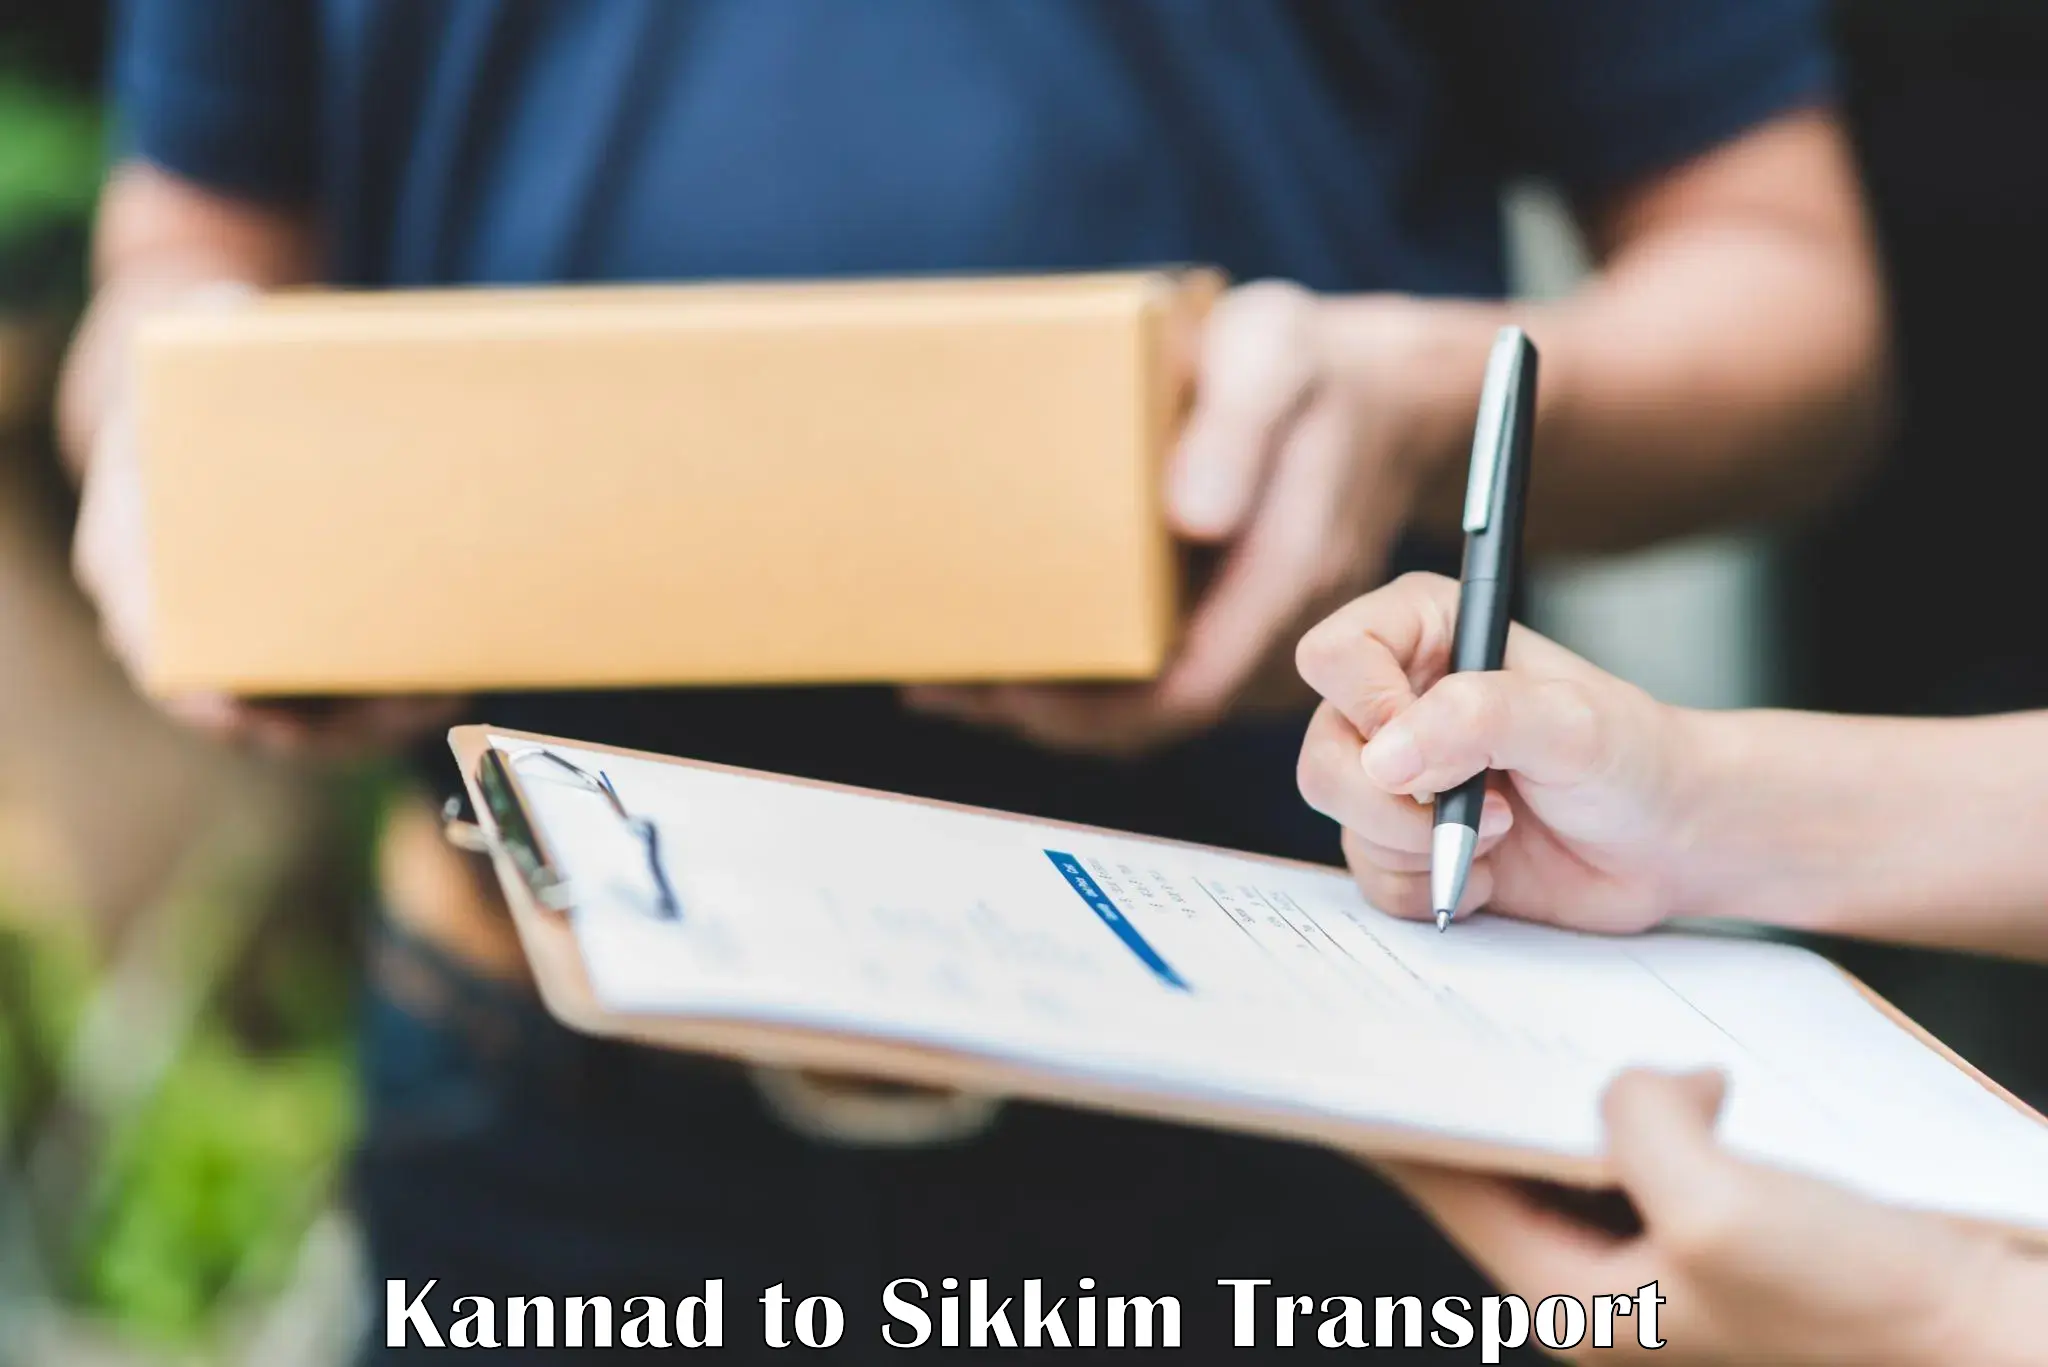 Nationwide transport services Kannad to Pelling